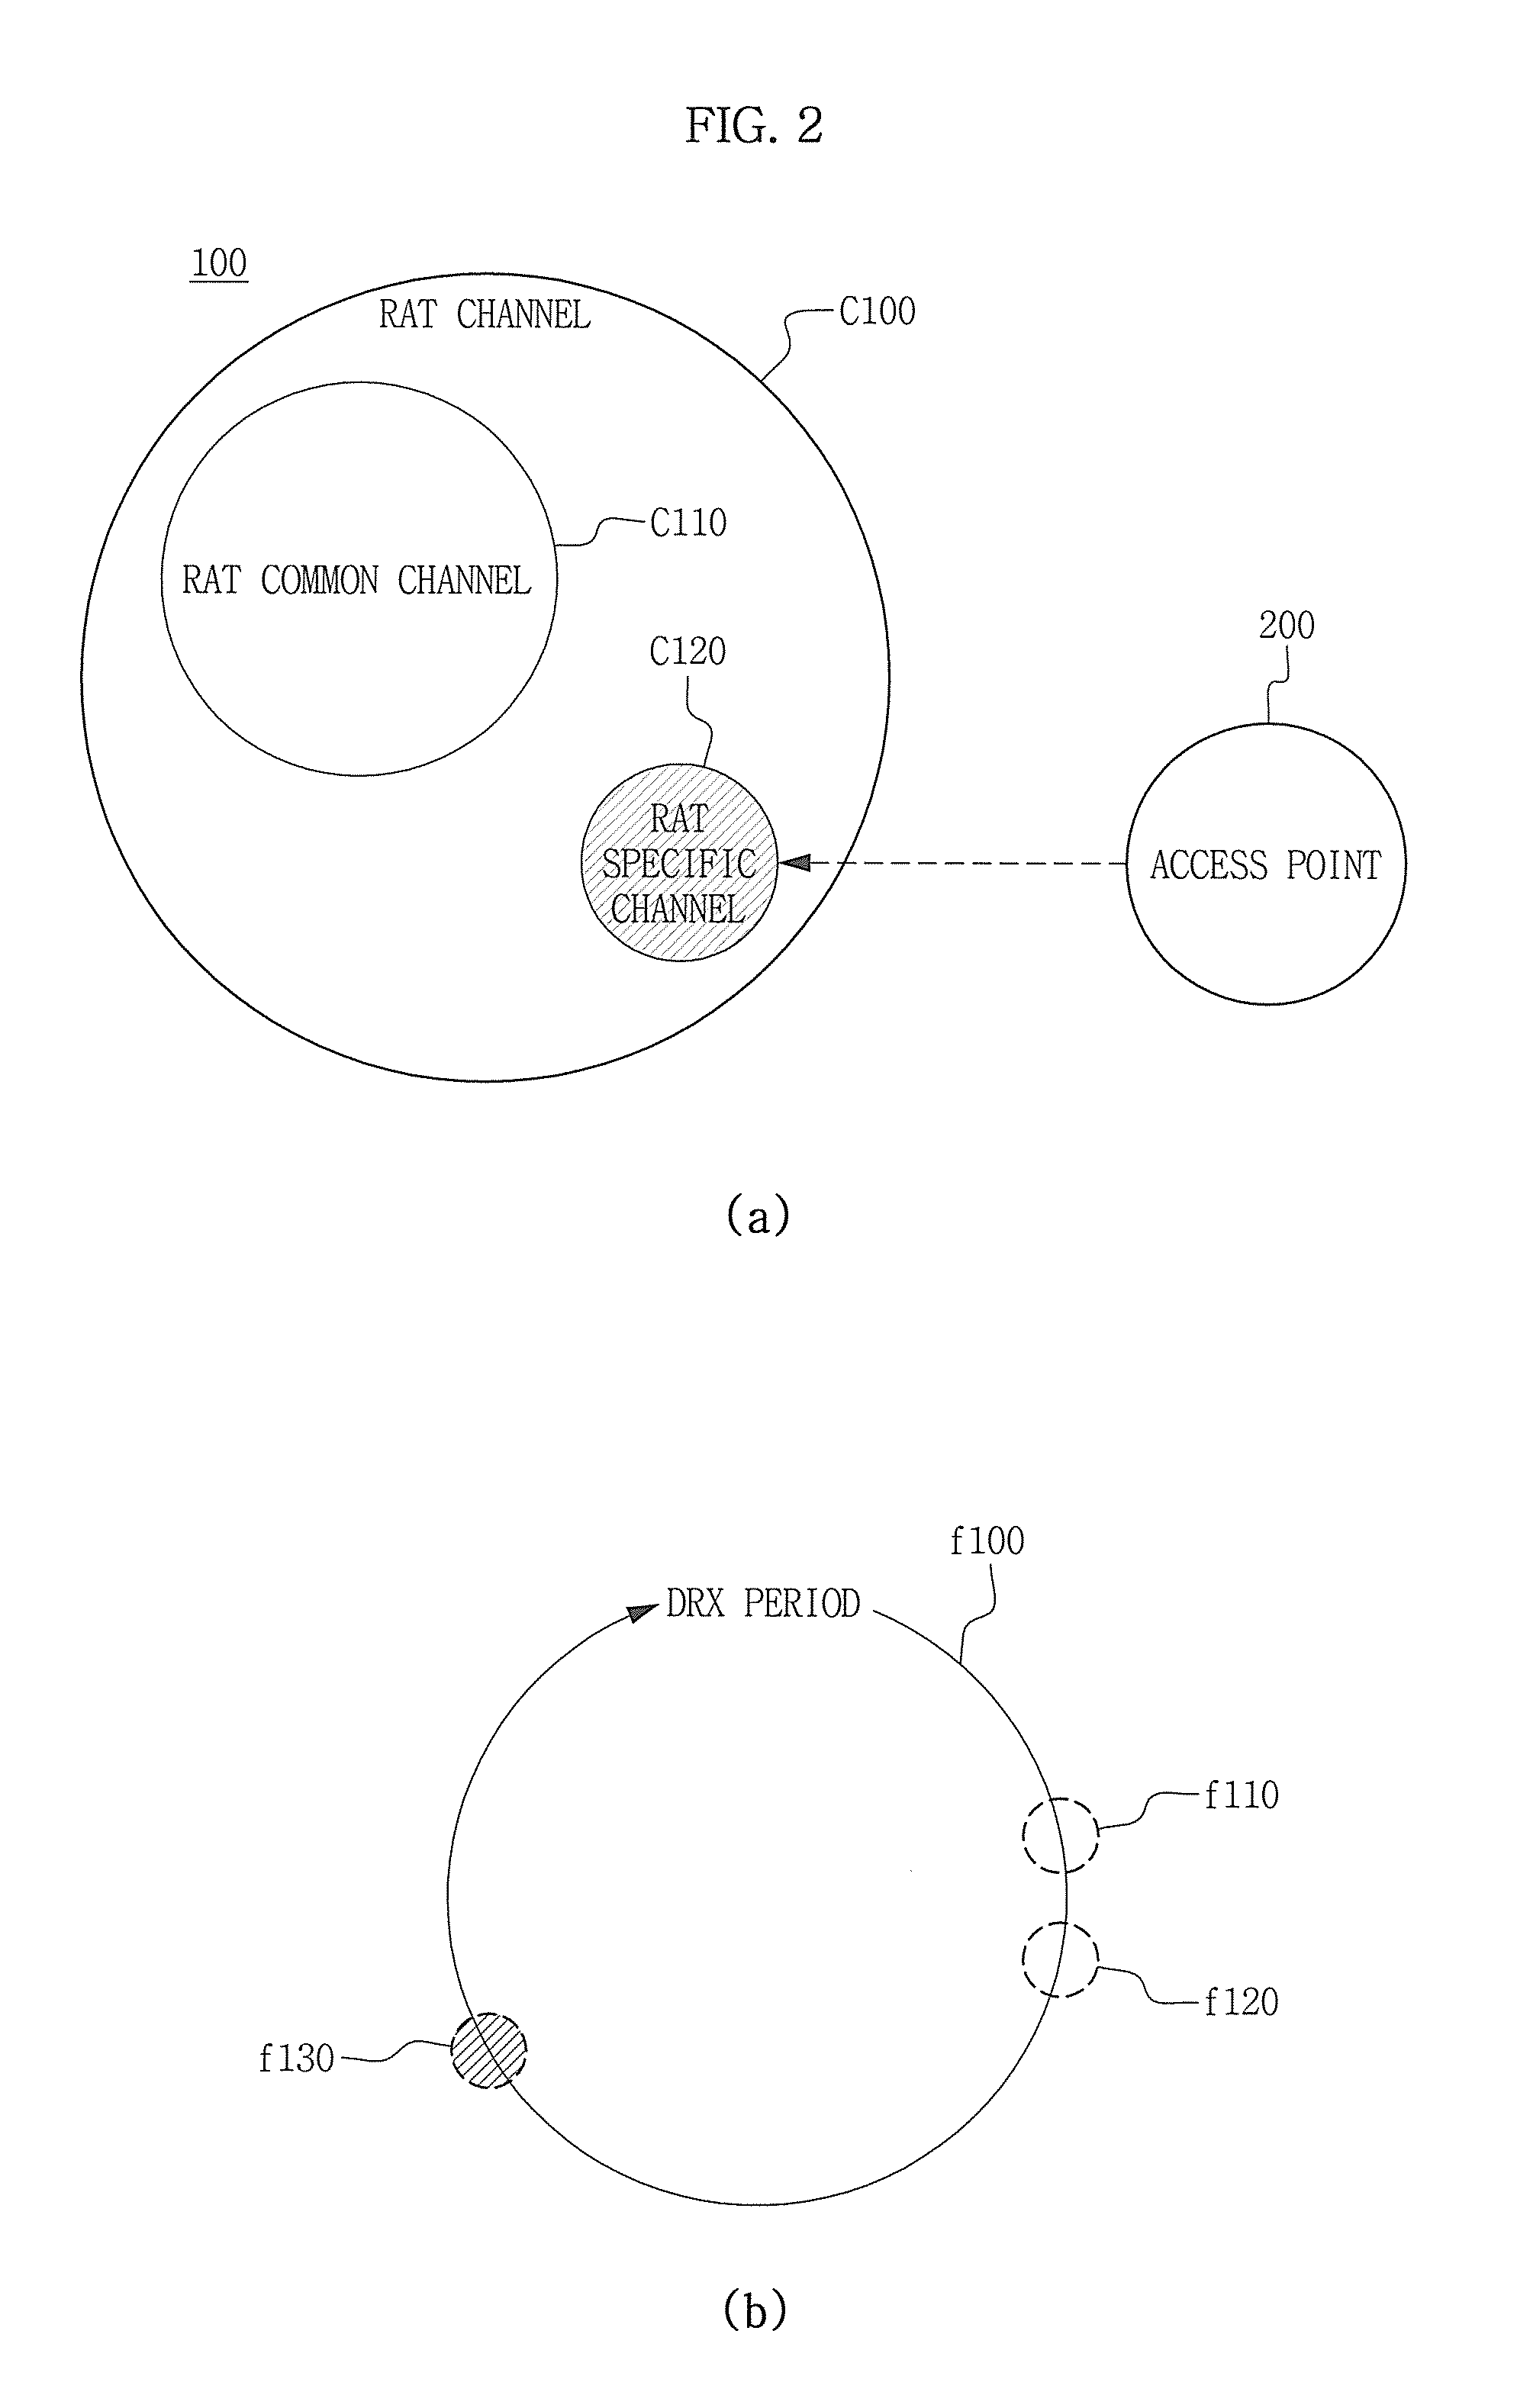 Fixed mobile convergence apparatus and method for searching access point